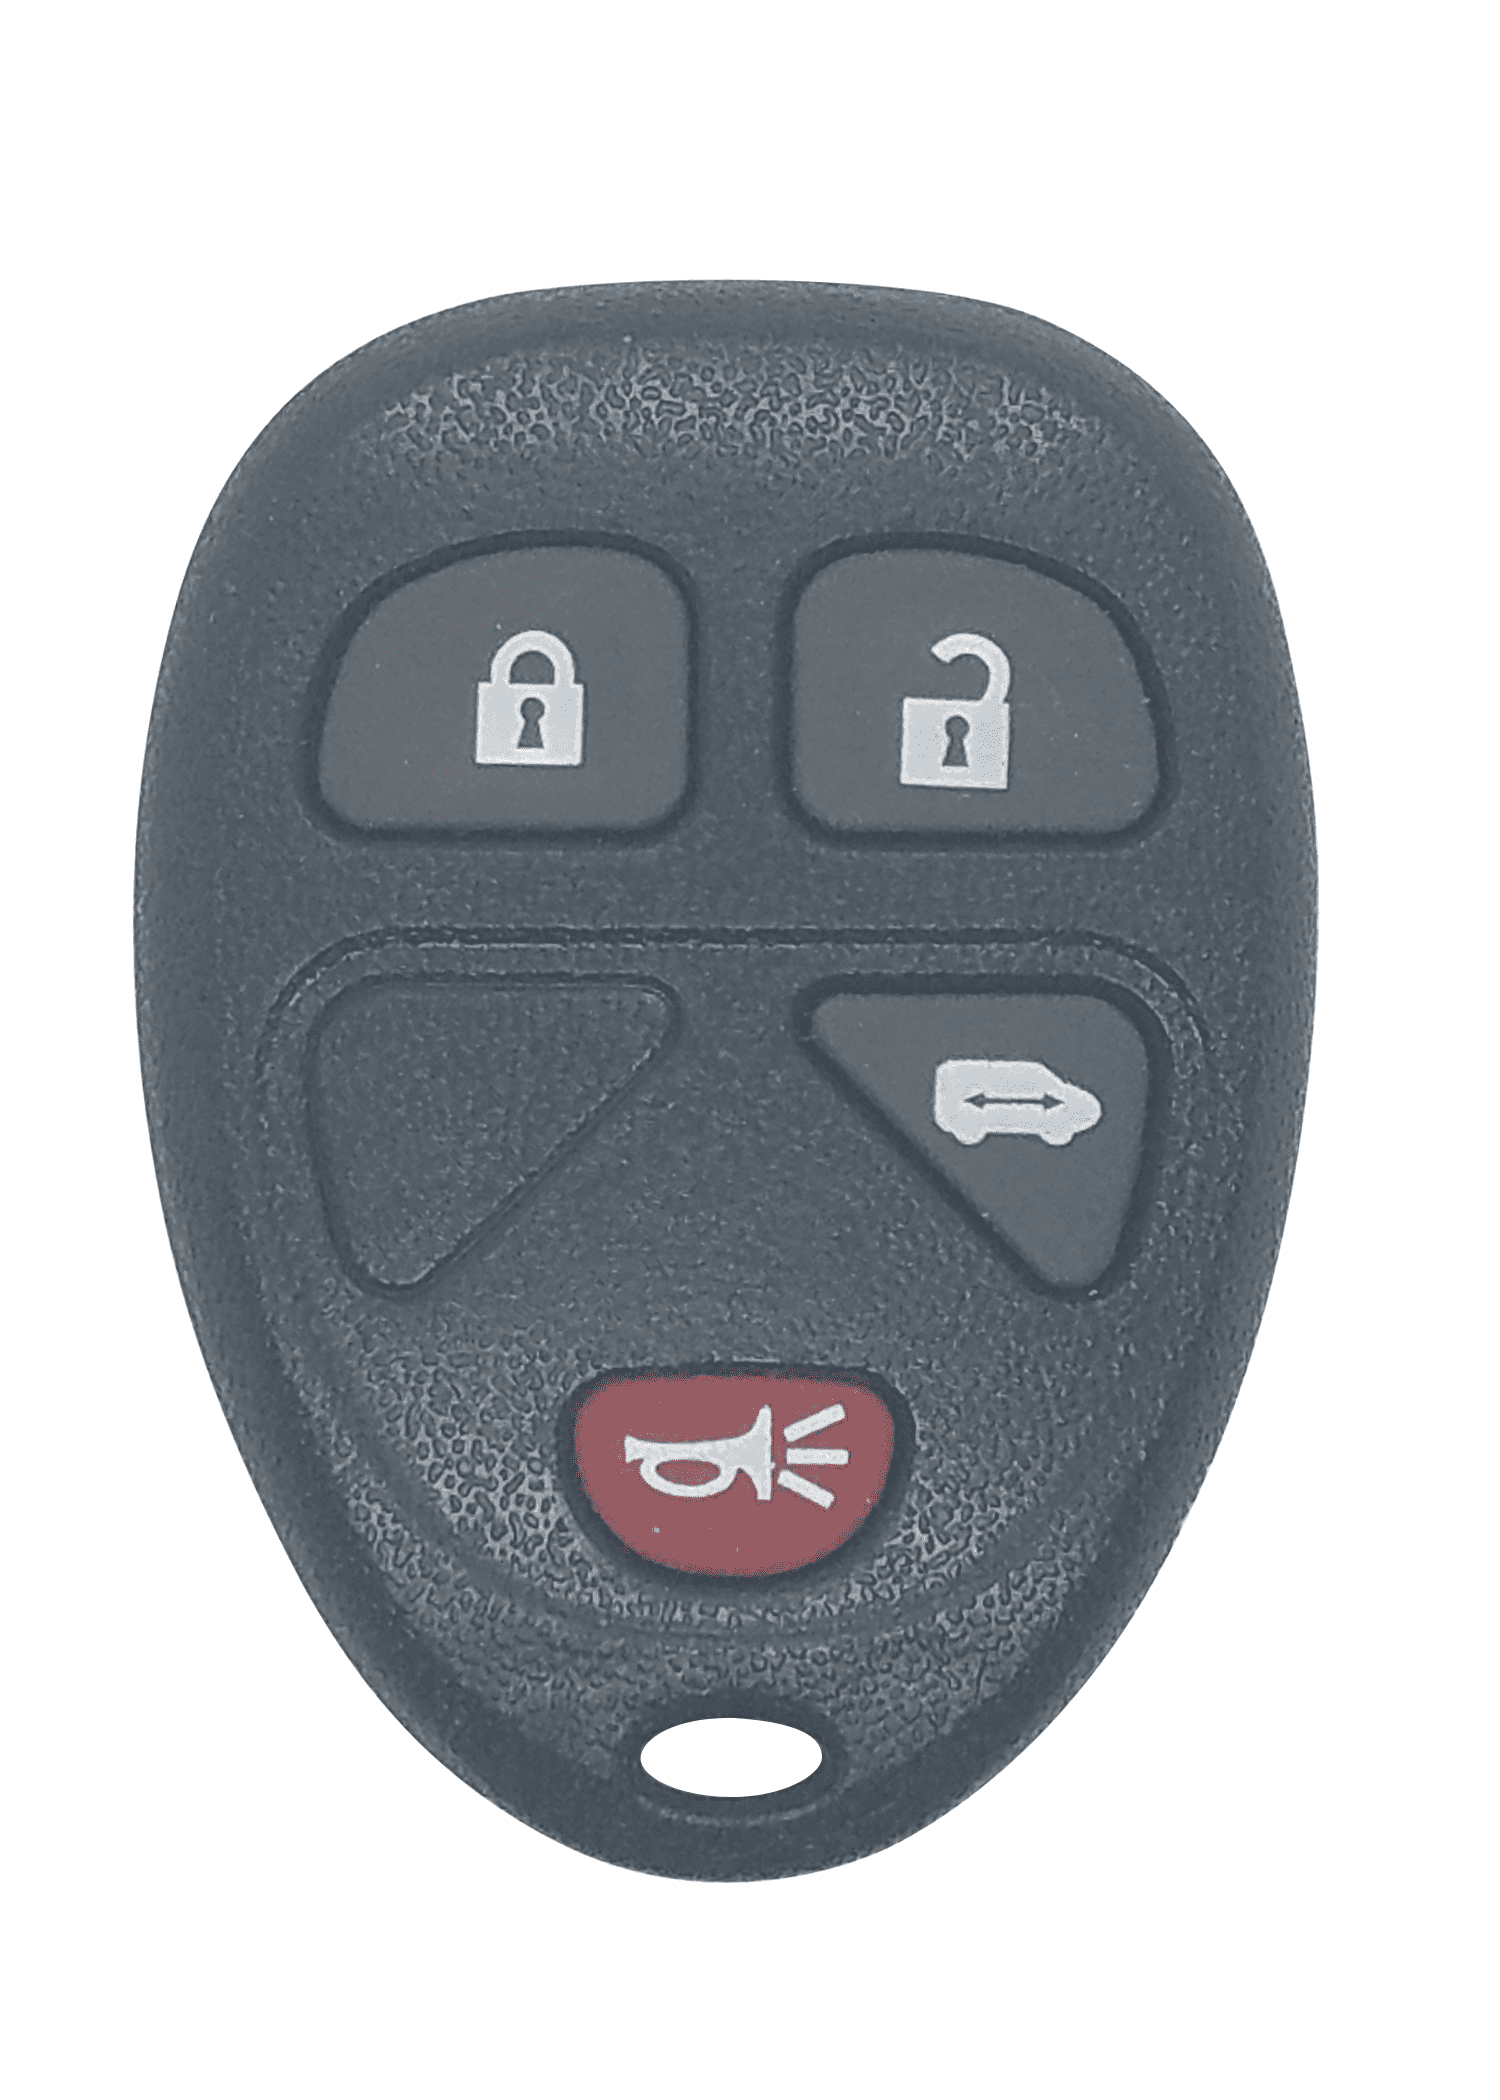 2 New Replacement 4 Button Keyless Entry Remote Pads For KOBGT04A 15100812 